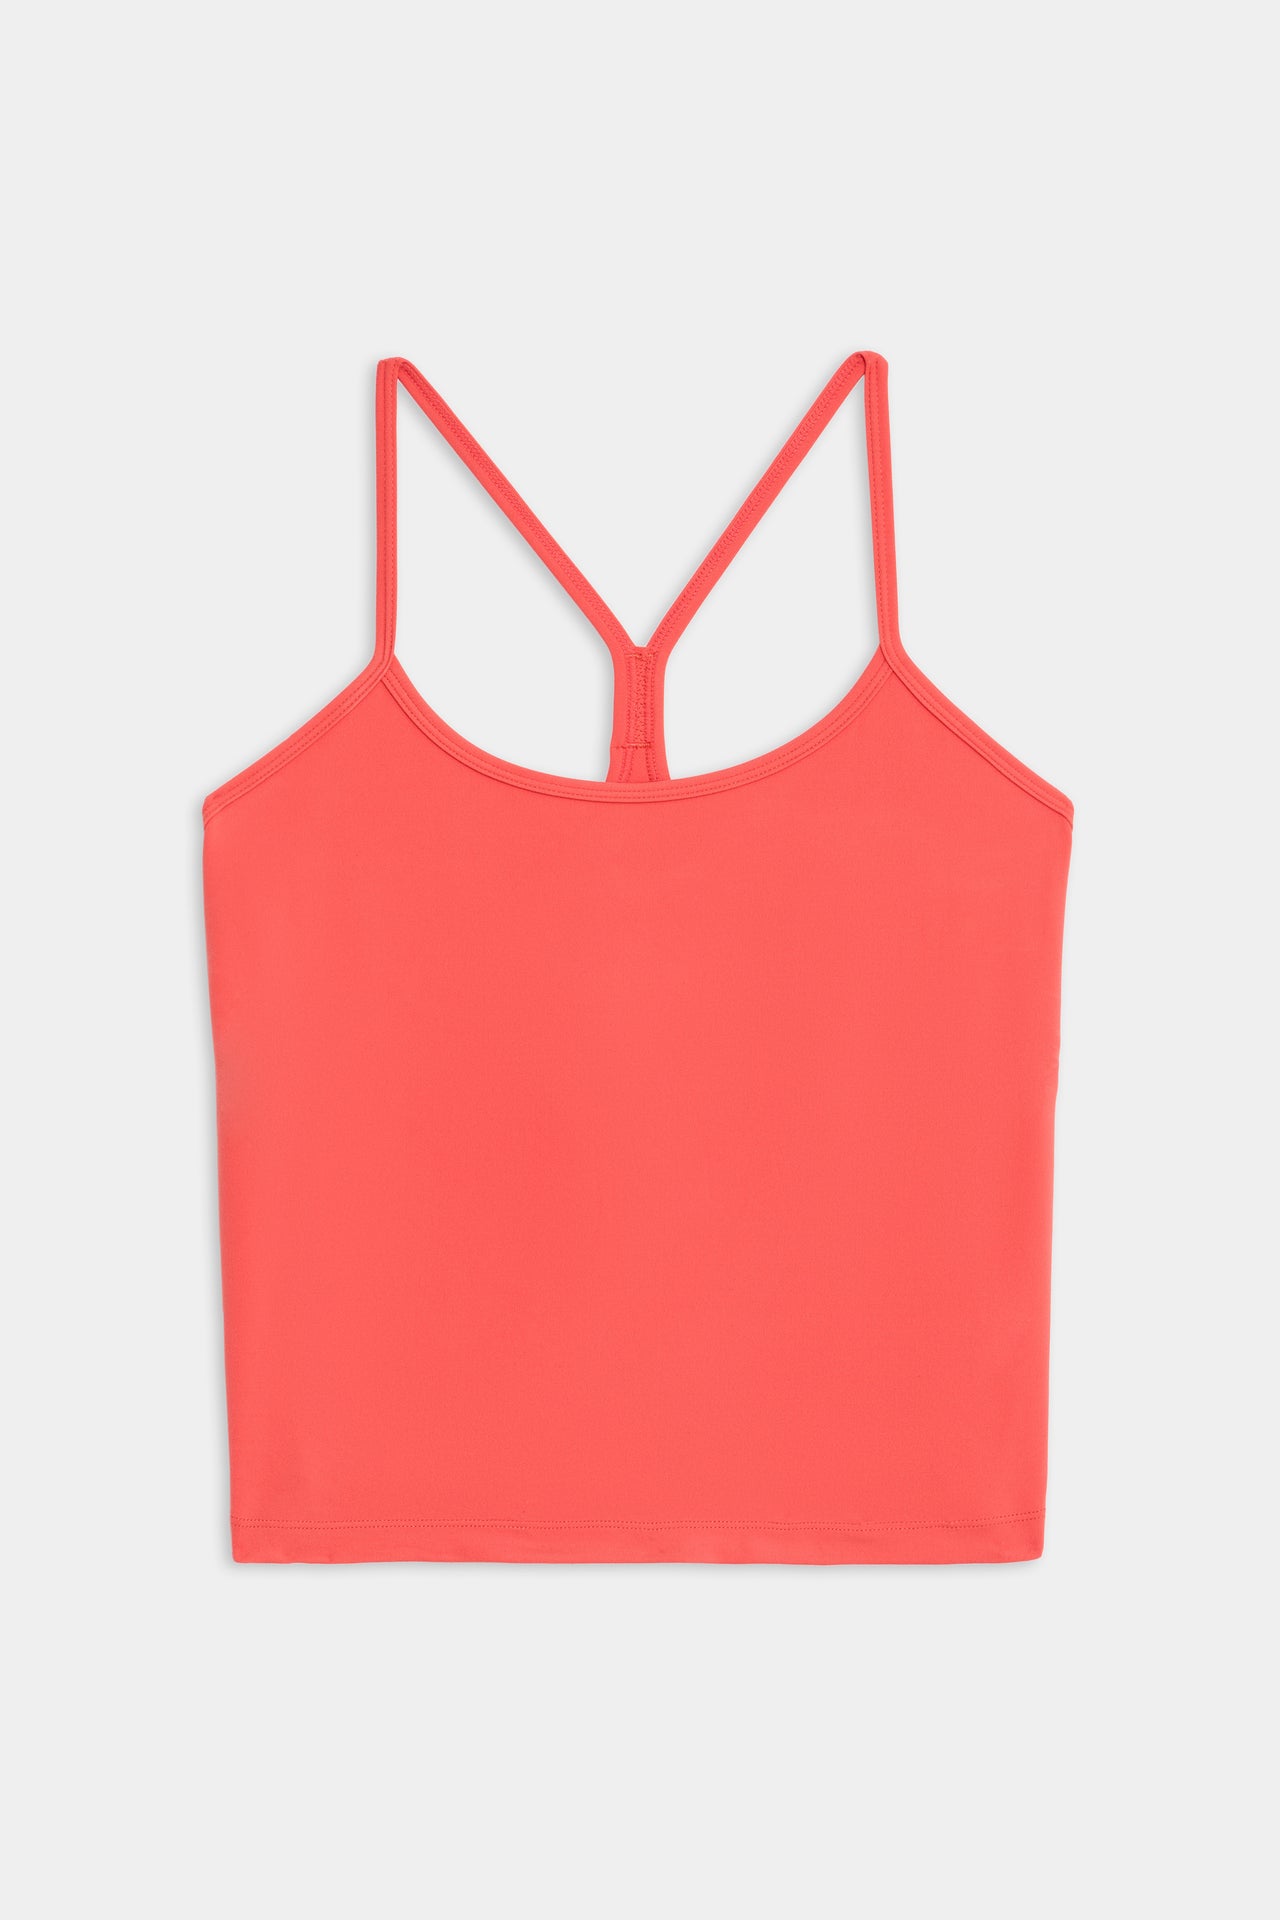 Airweight Tank sports bra in melon color by SPLITS59 isolated on white background.